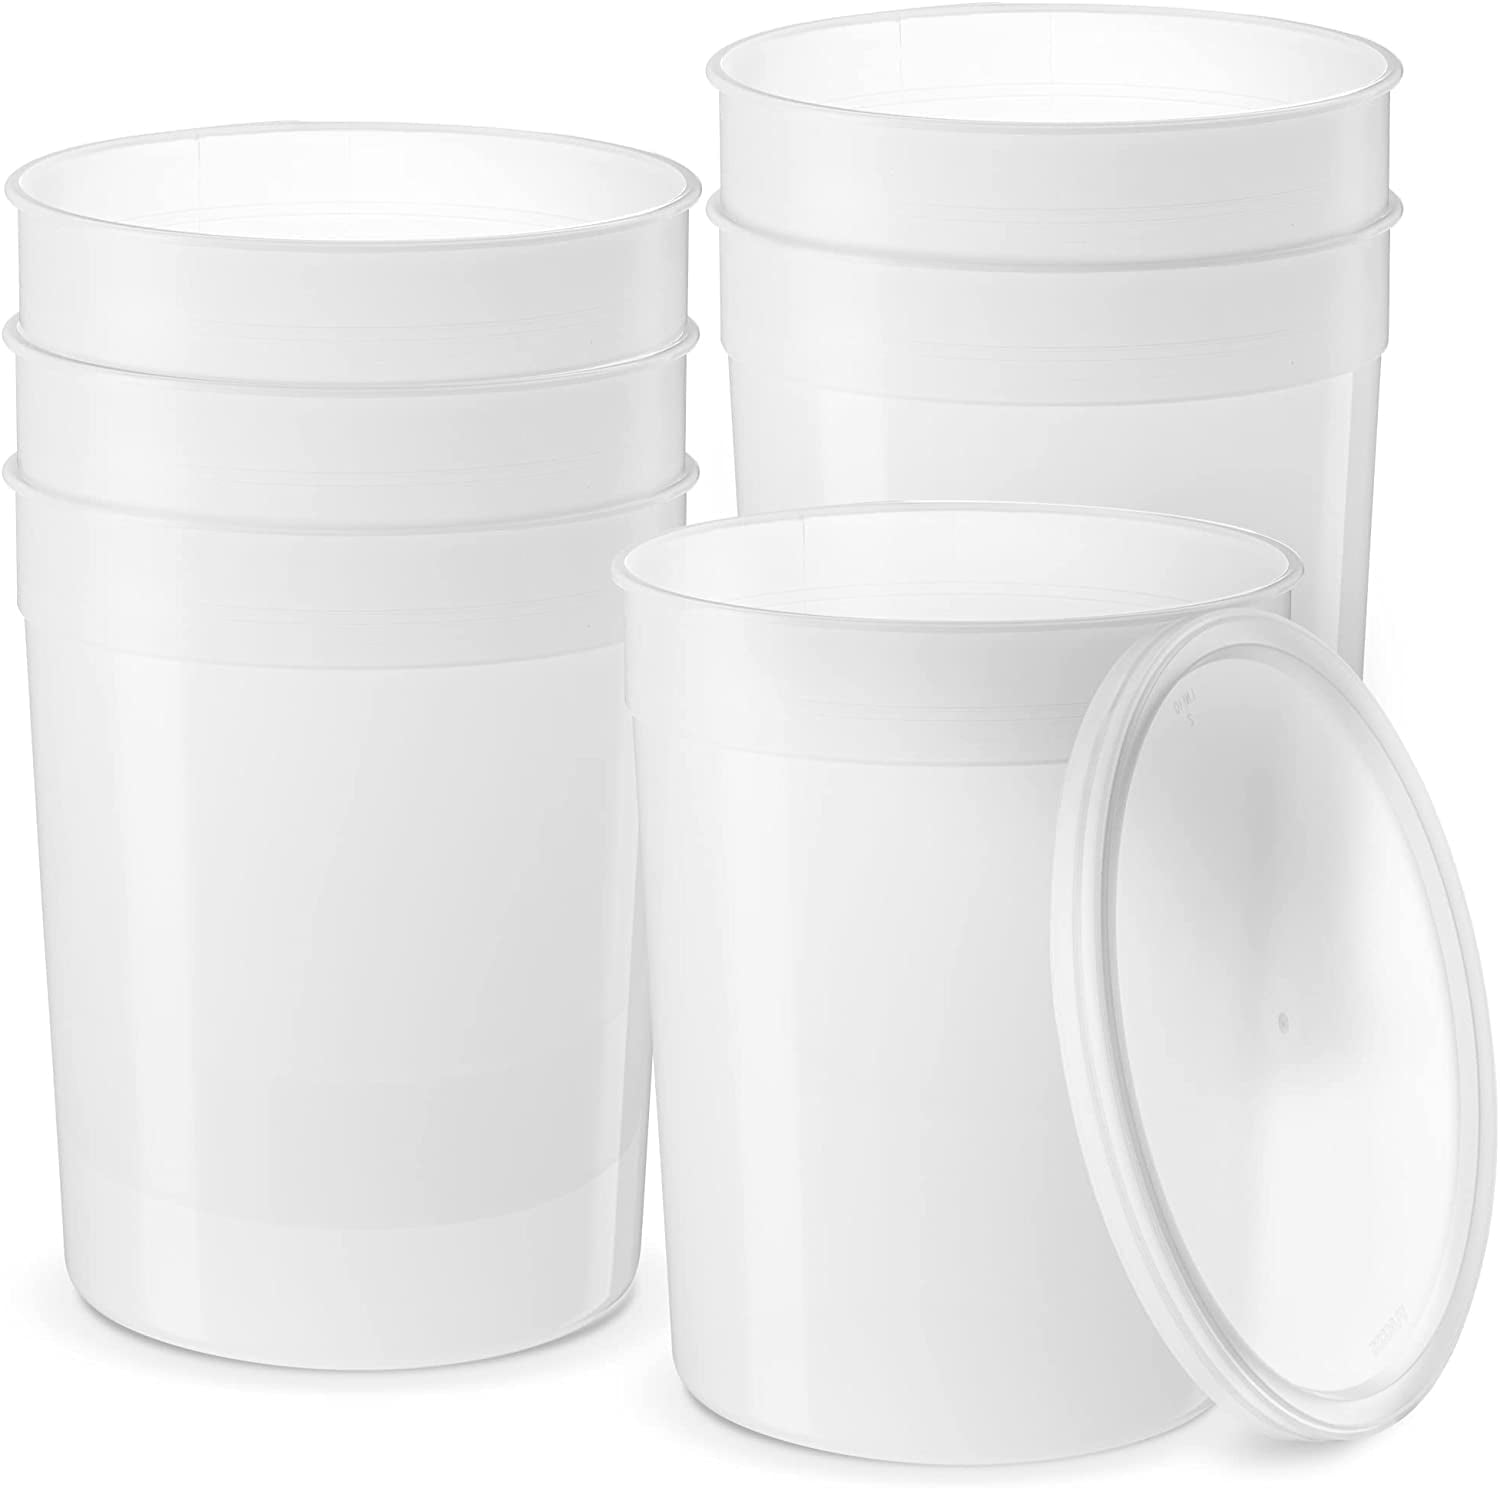 Glotoch Express Glotoch Soup Containers with Lids, 48 Pack 8 oz(1 Cup) Deli Containers, to Go Containers, Freezer Containers for Food-Microwave